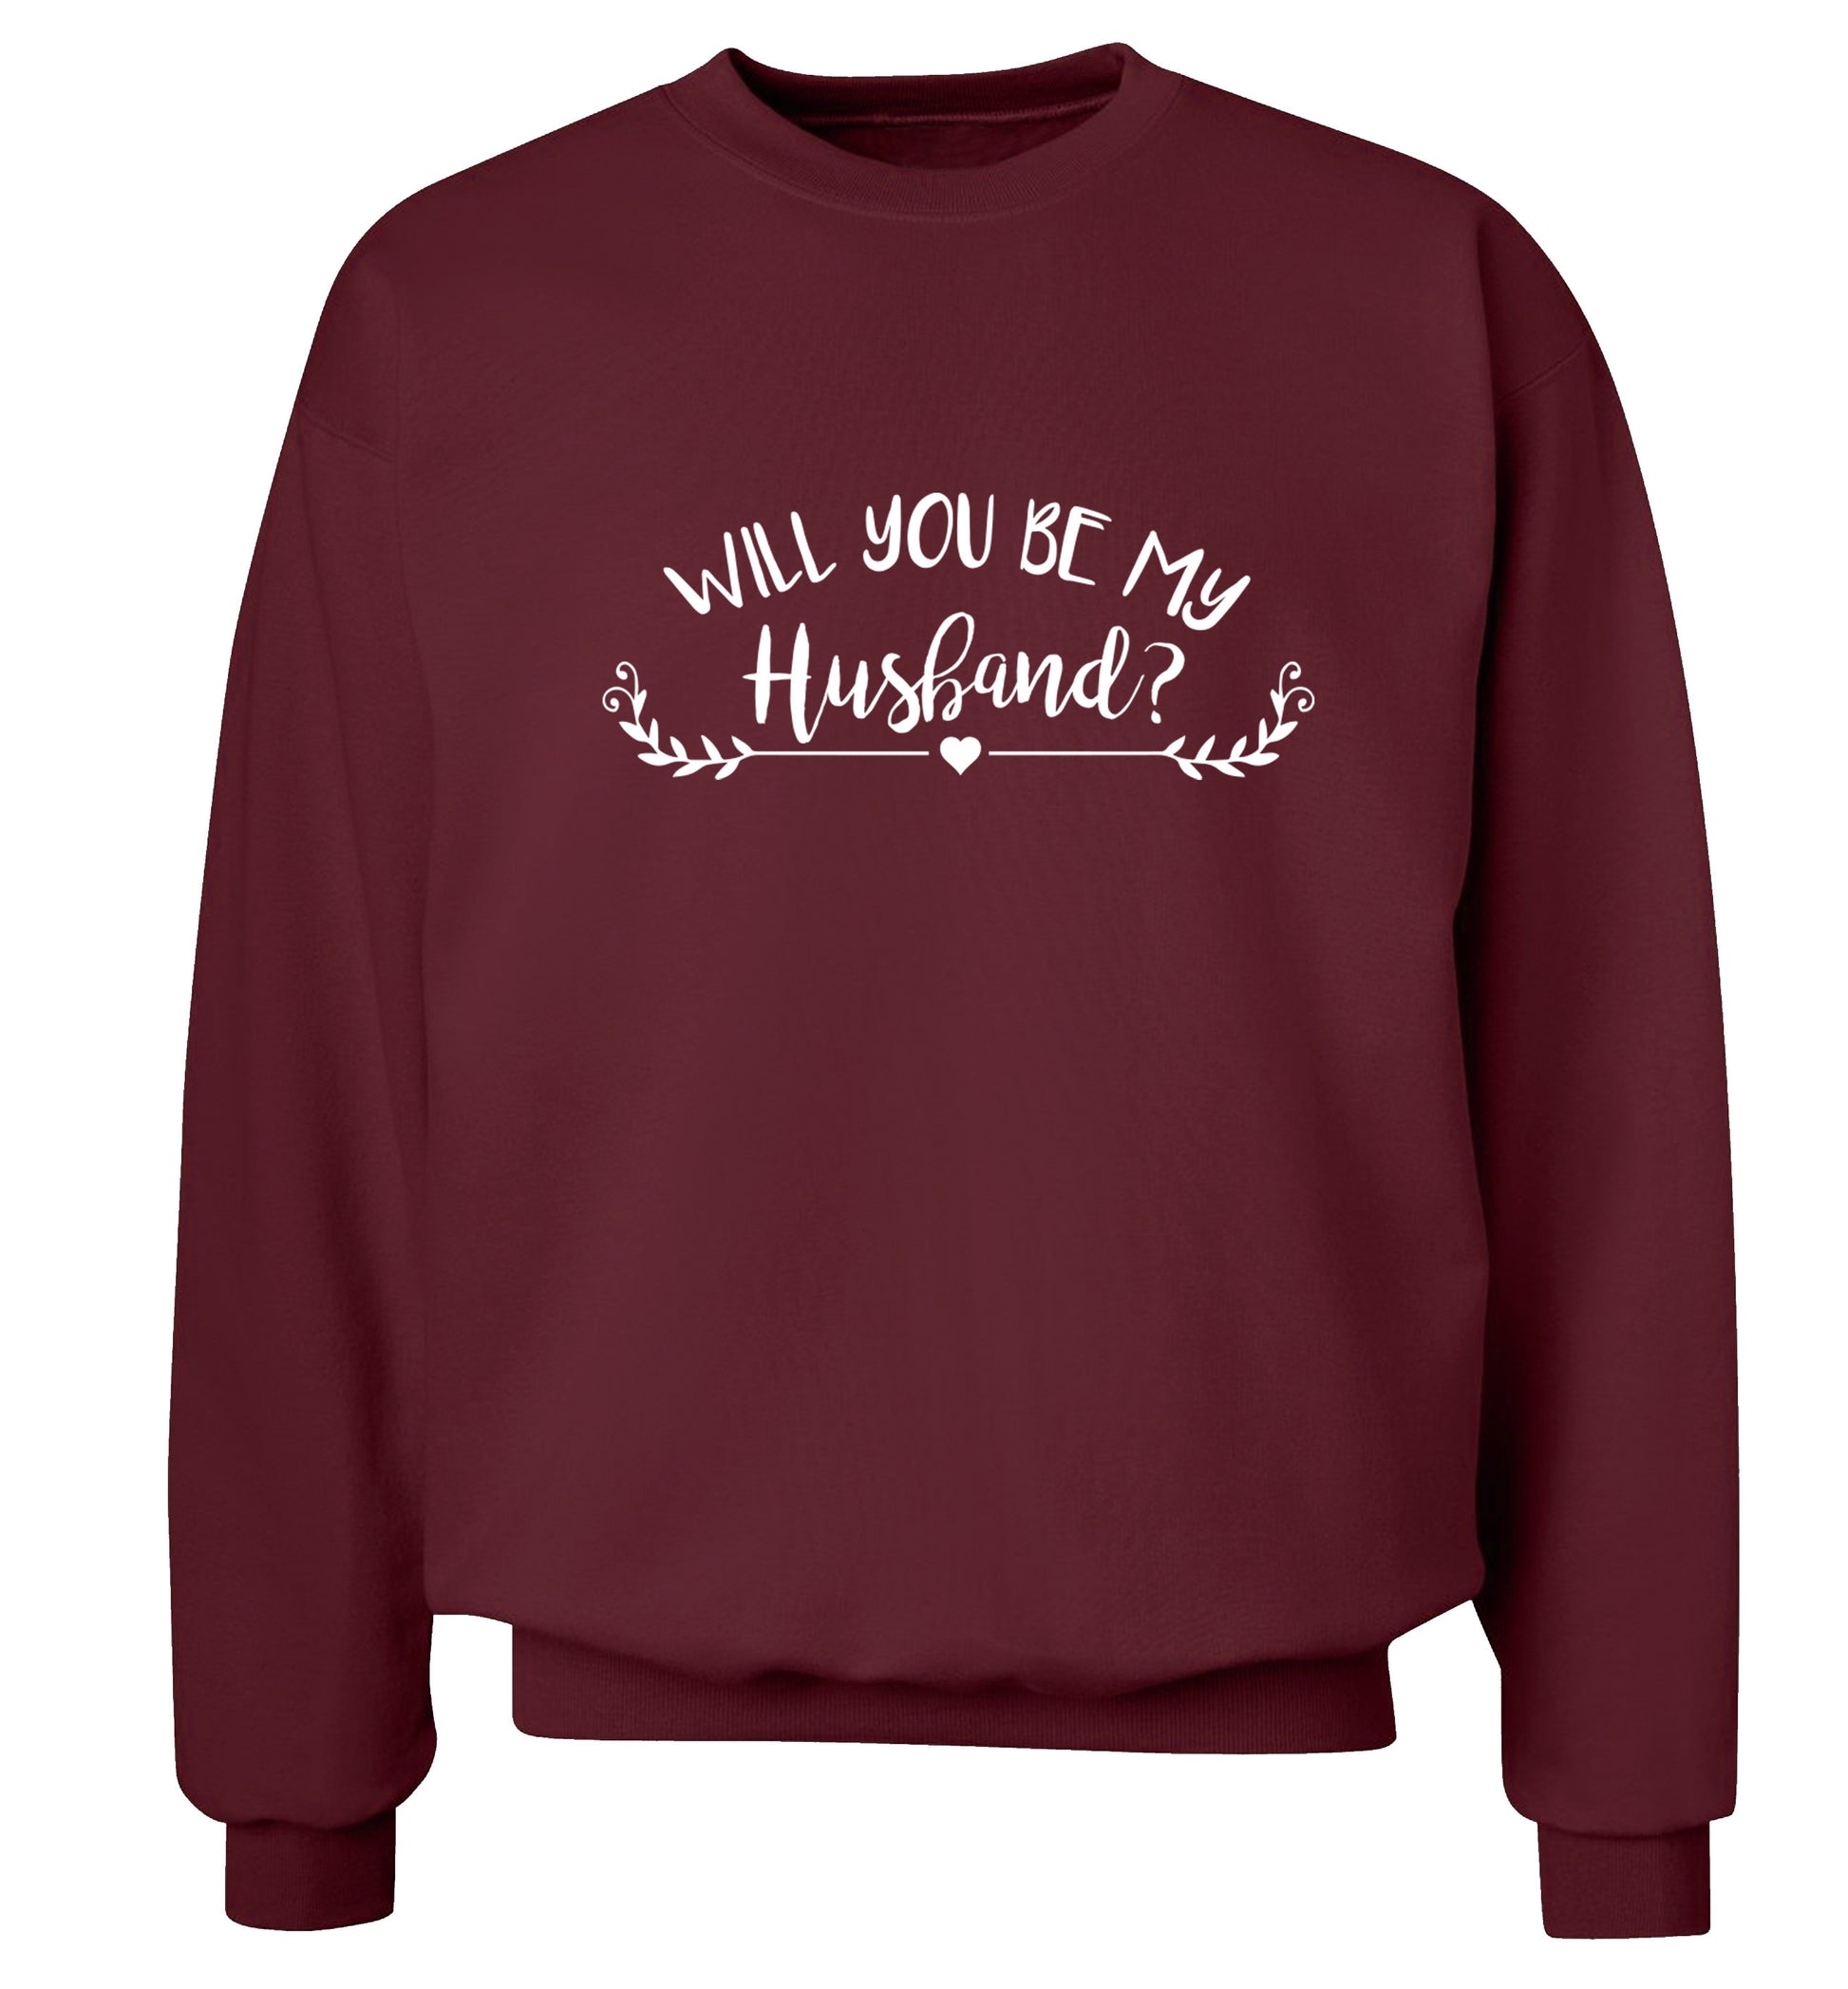 Will you be my husband? Adult's unisex maroon Sweater 2XL